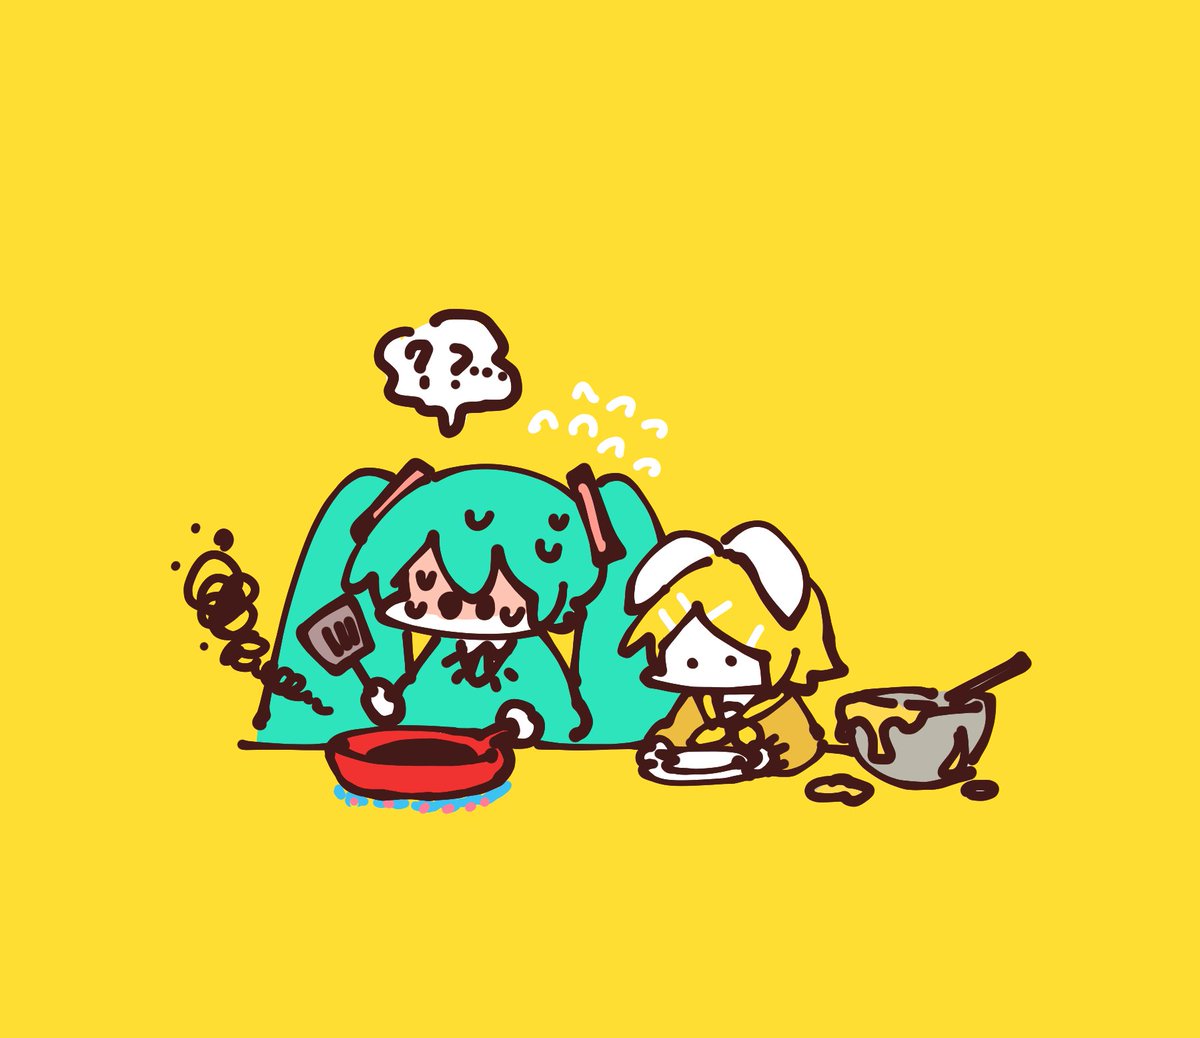 hatsune miku ,kagamine rin 2girls multiple girls ? spatula cooking twintails blonde hair  illustration images